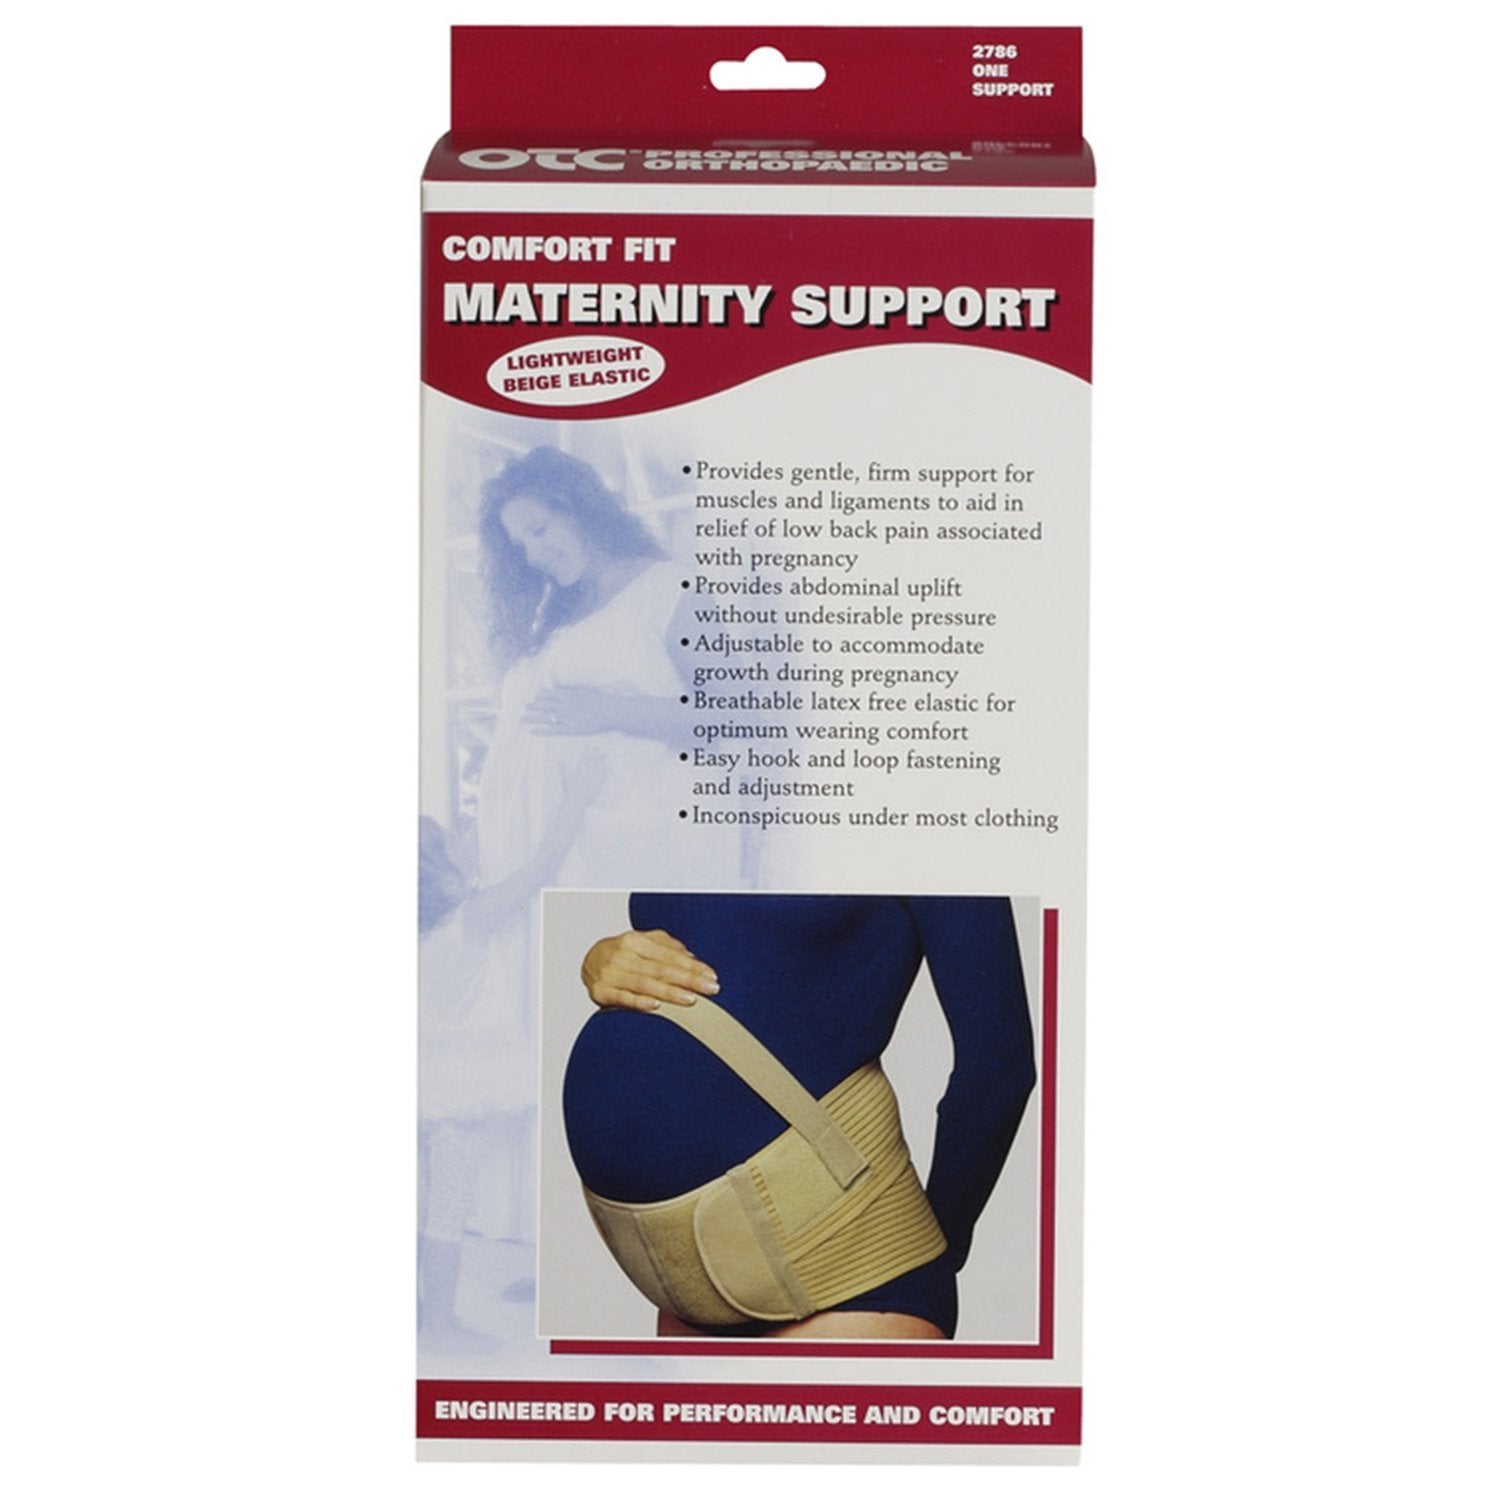 Airway Comfort Fit Maternity Support